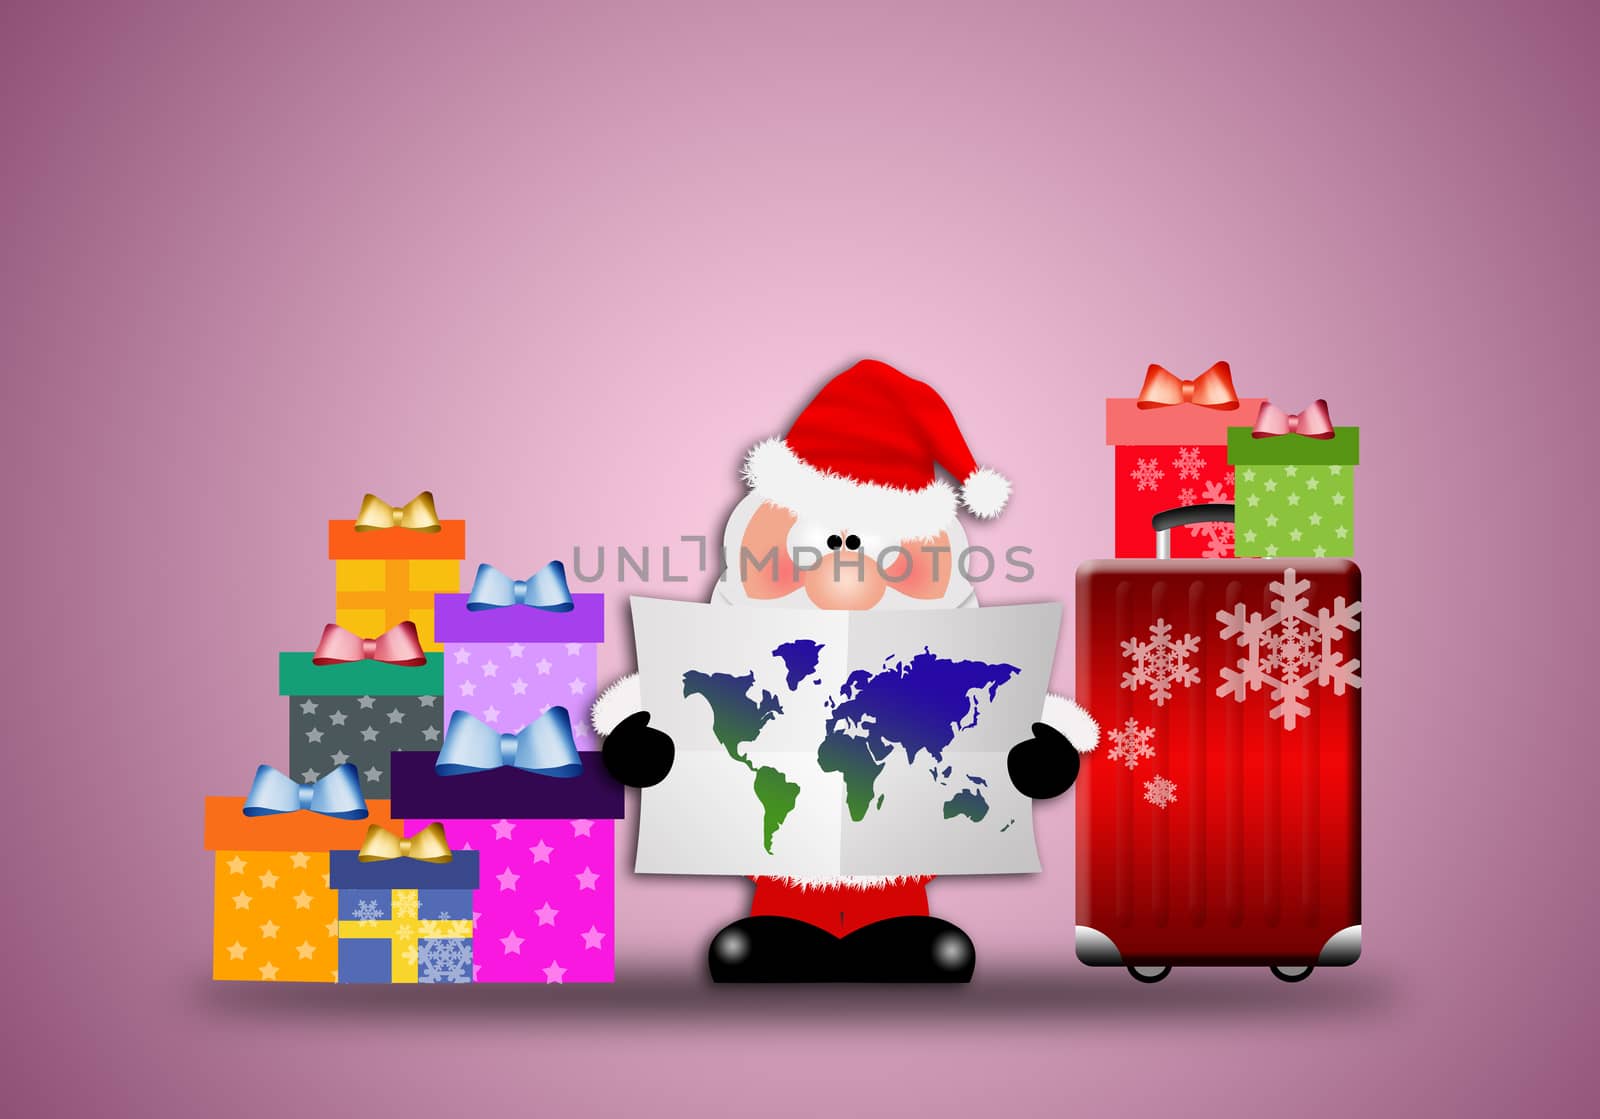 Santa Claus with list by sognolucido